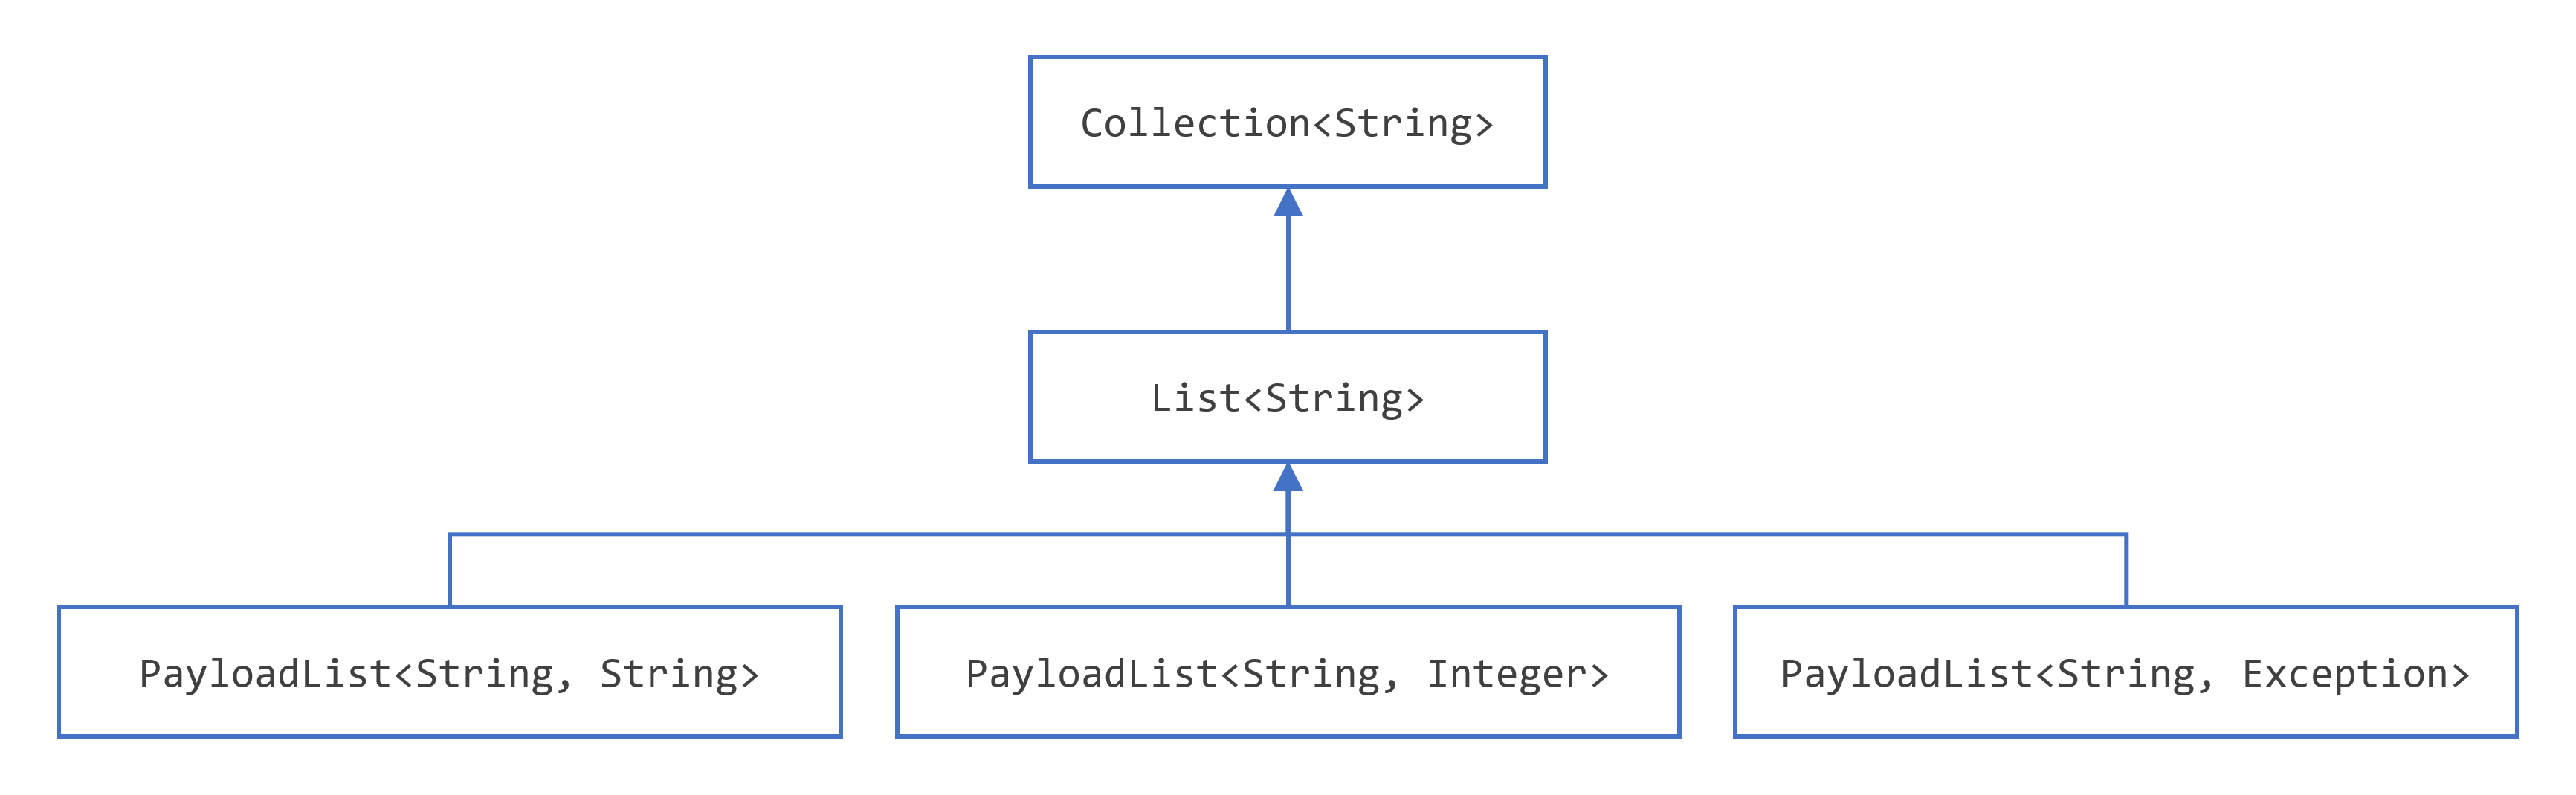 A sample Payload hierarchy